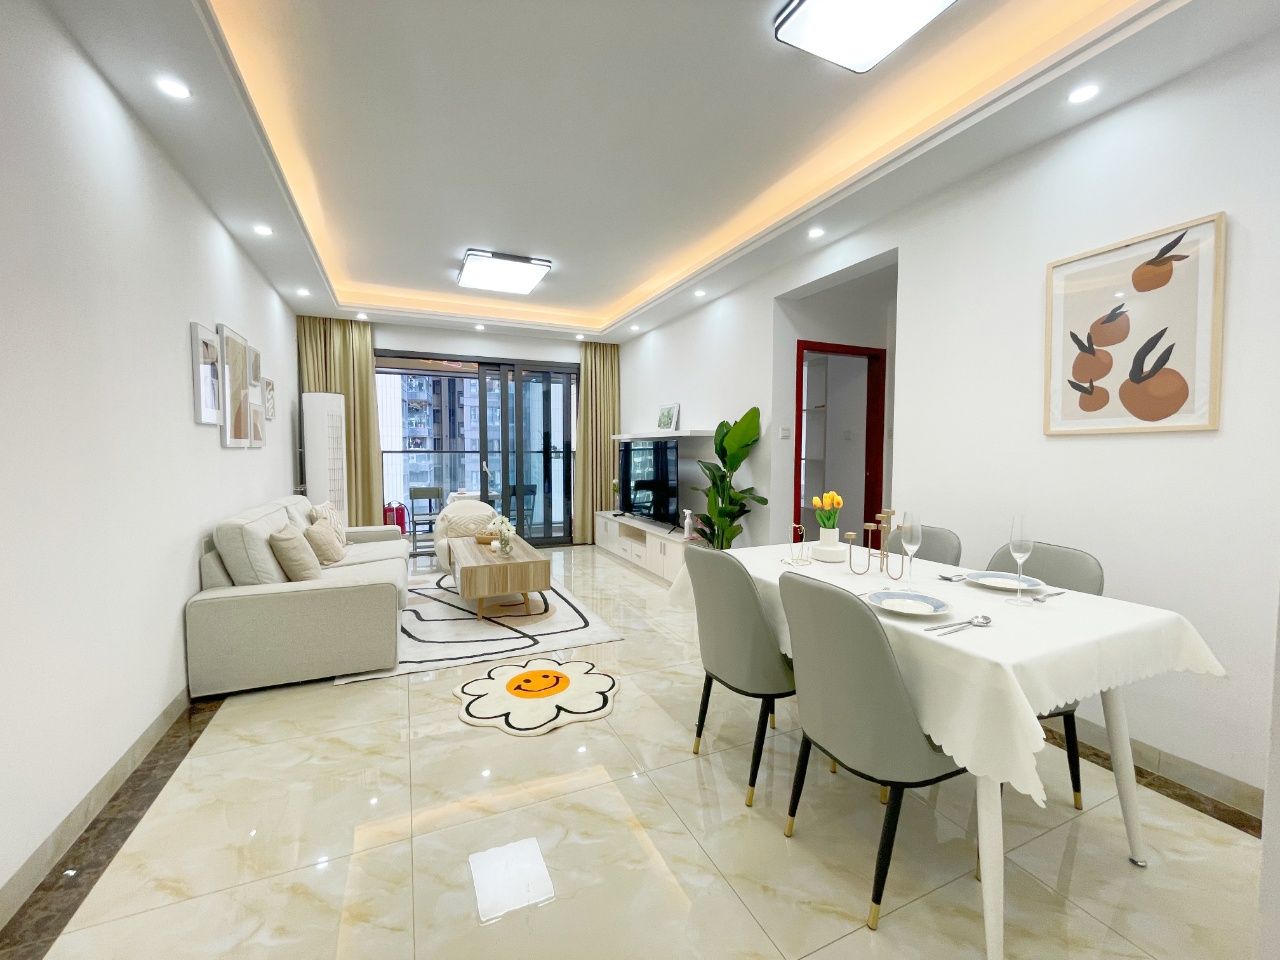 Featured image for “Nice and clean apt with 2bedrooms nearby the Dongjiaotou metro”